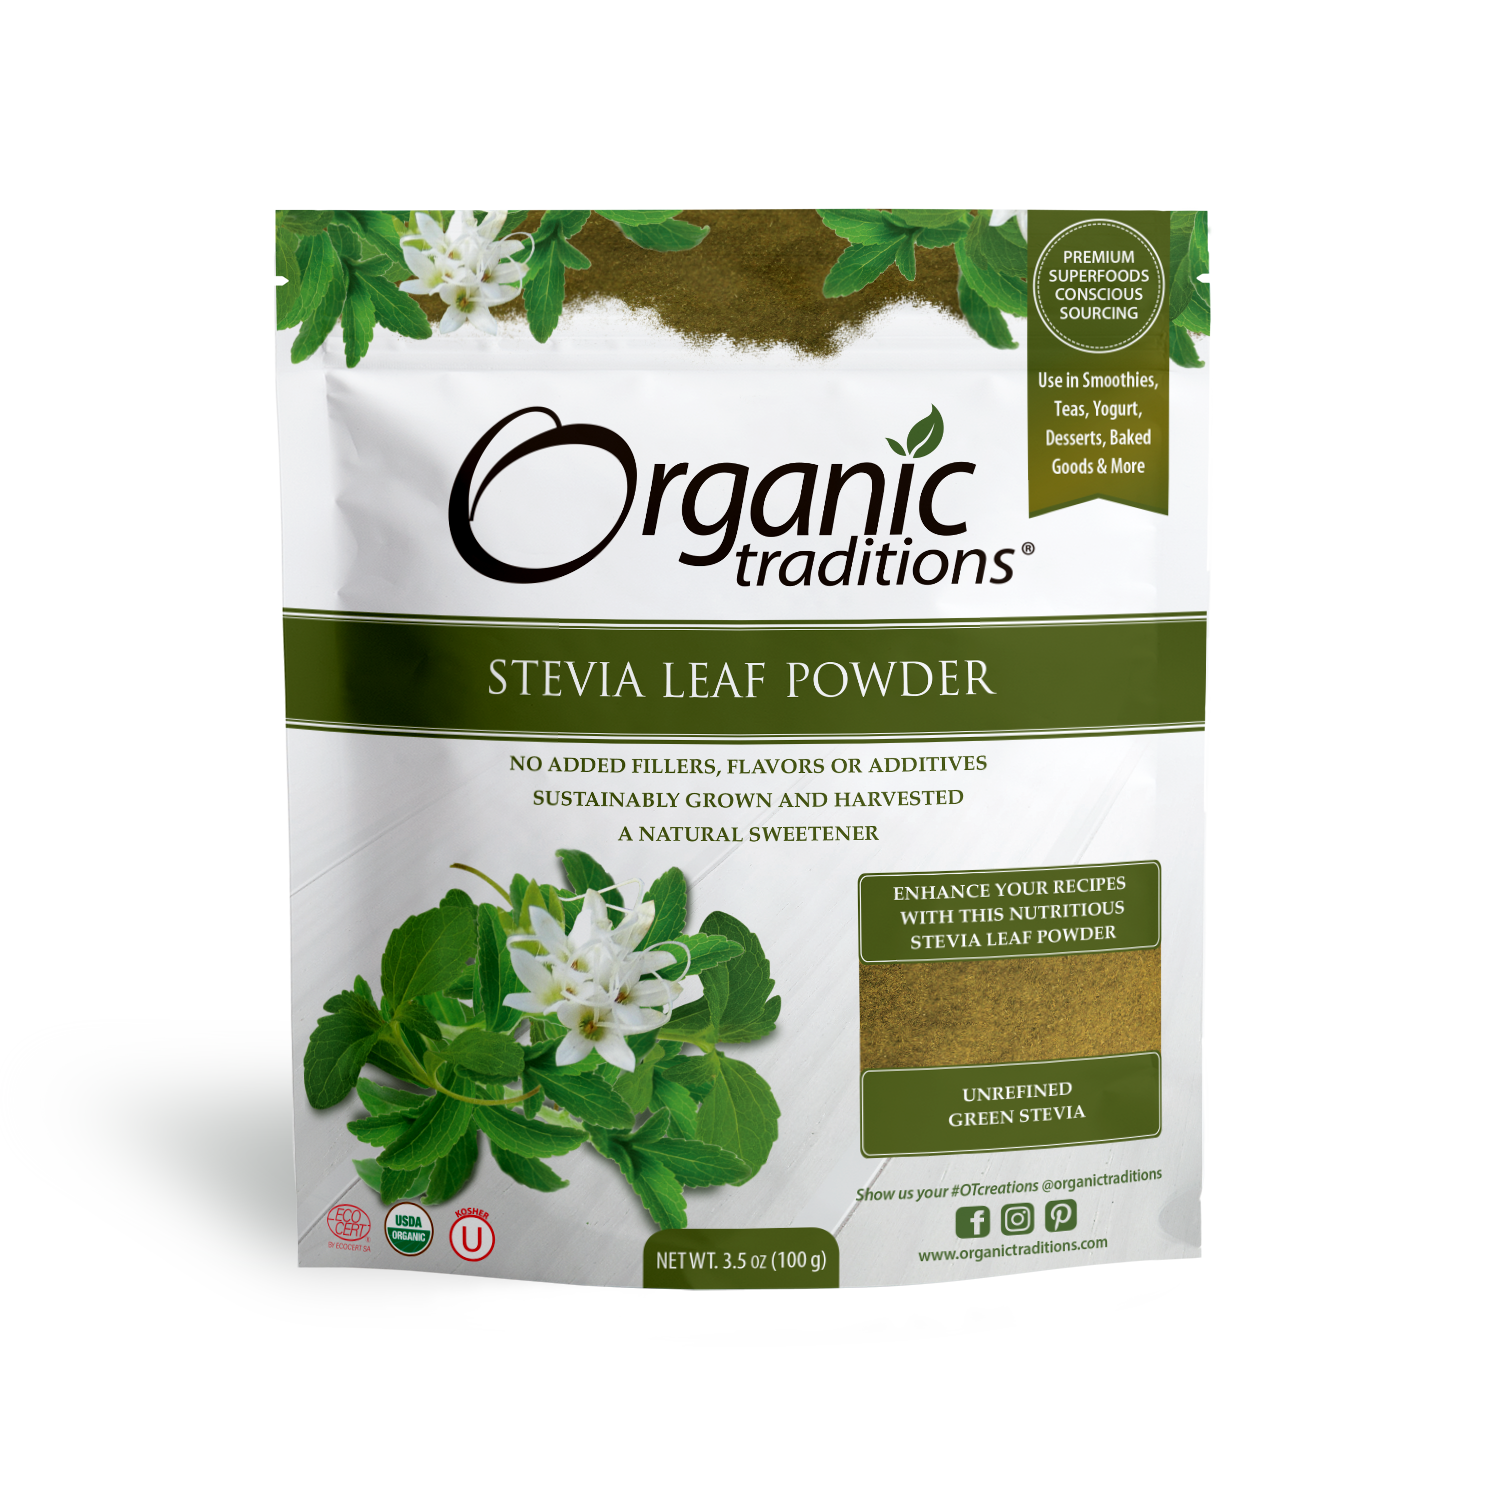 Pure Organic Stevia Extract, No Fillers